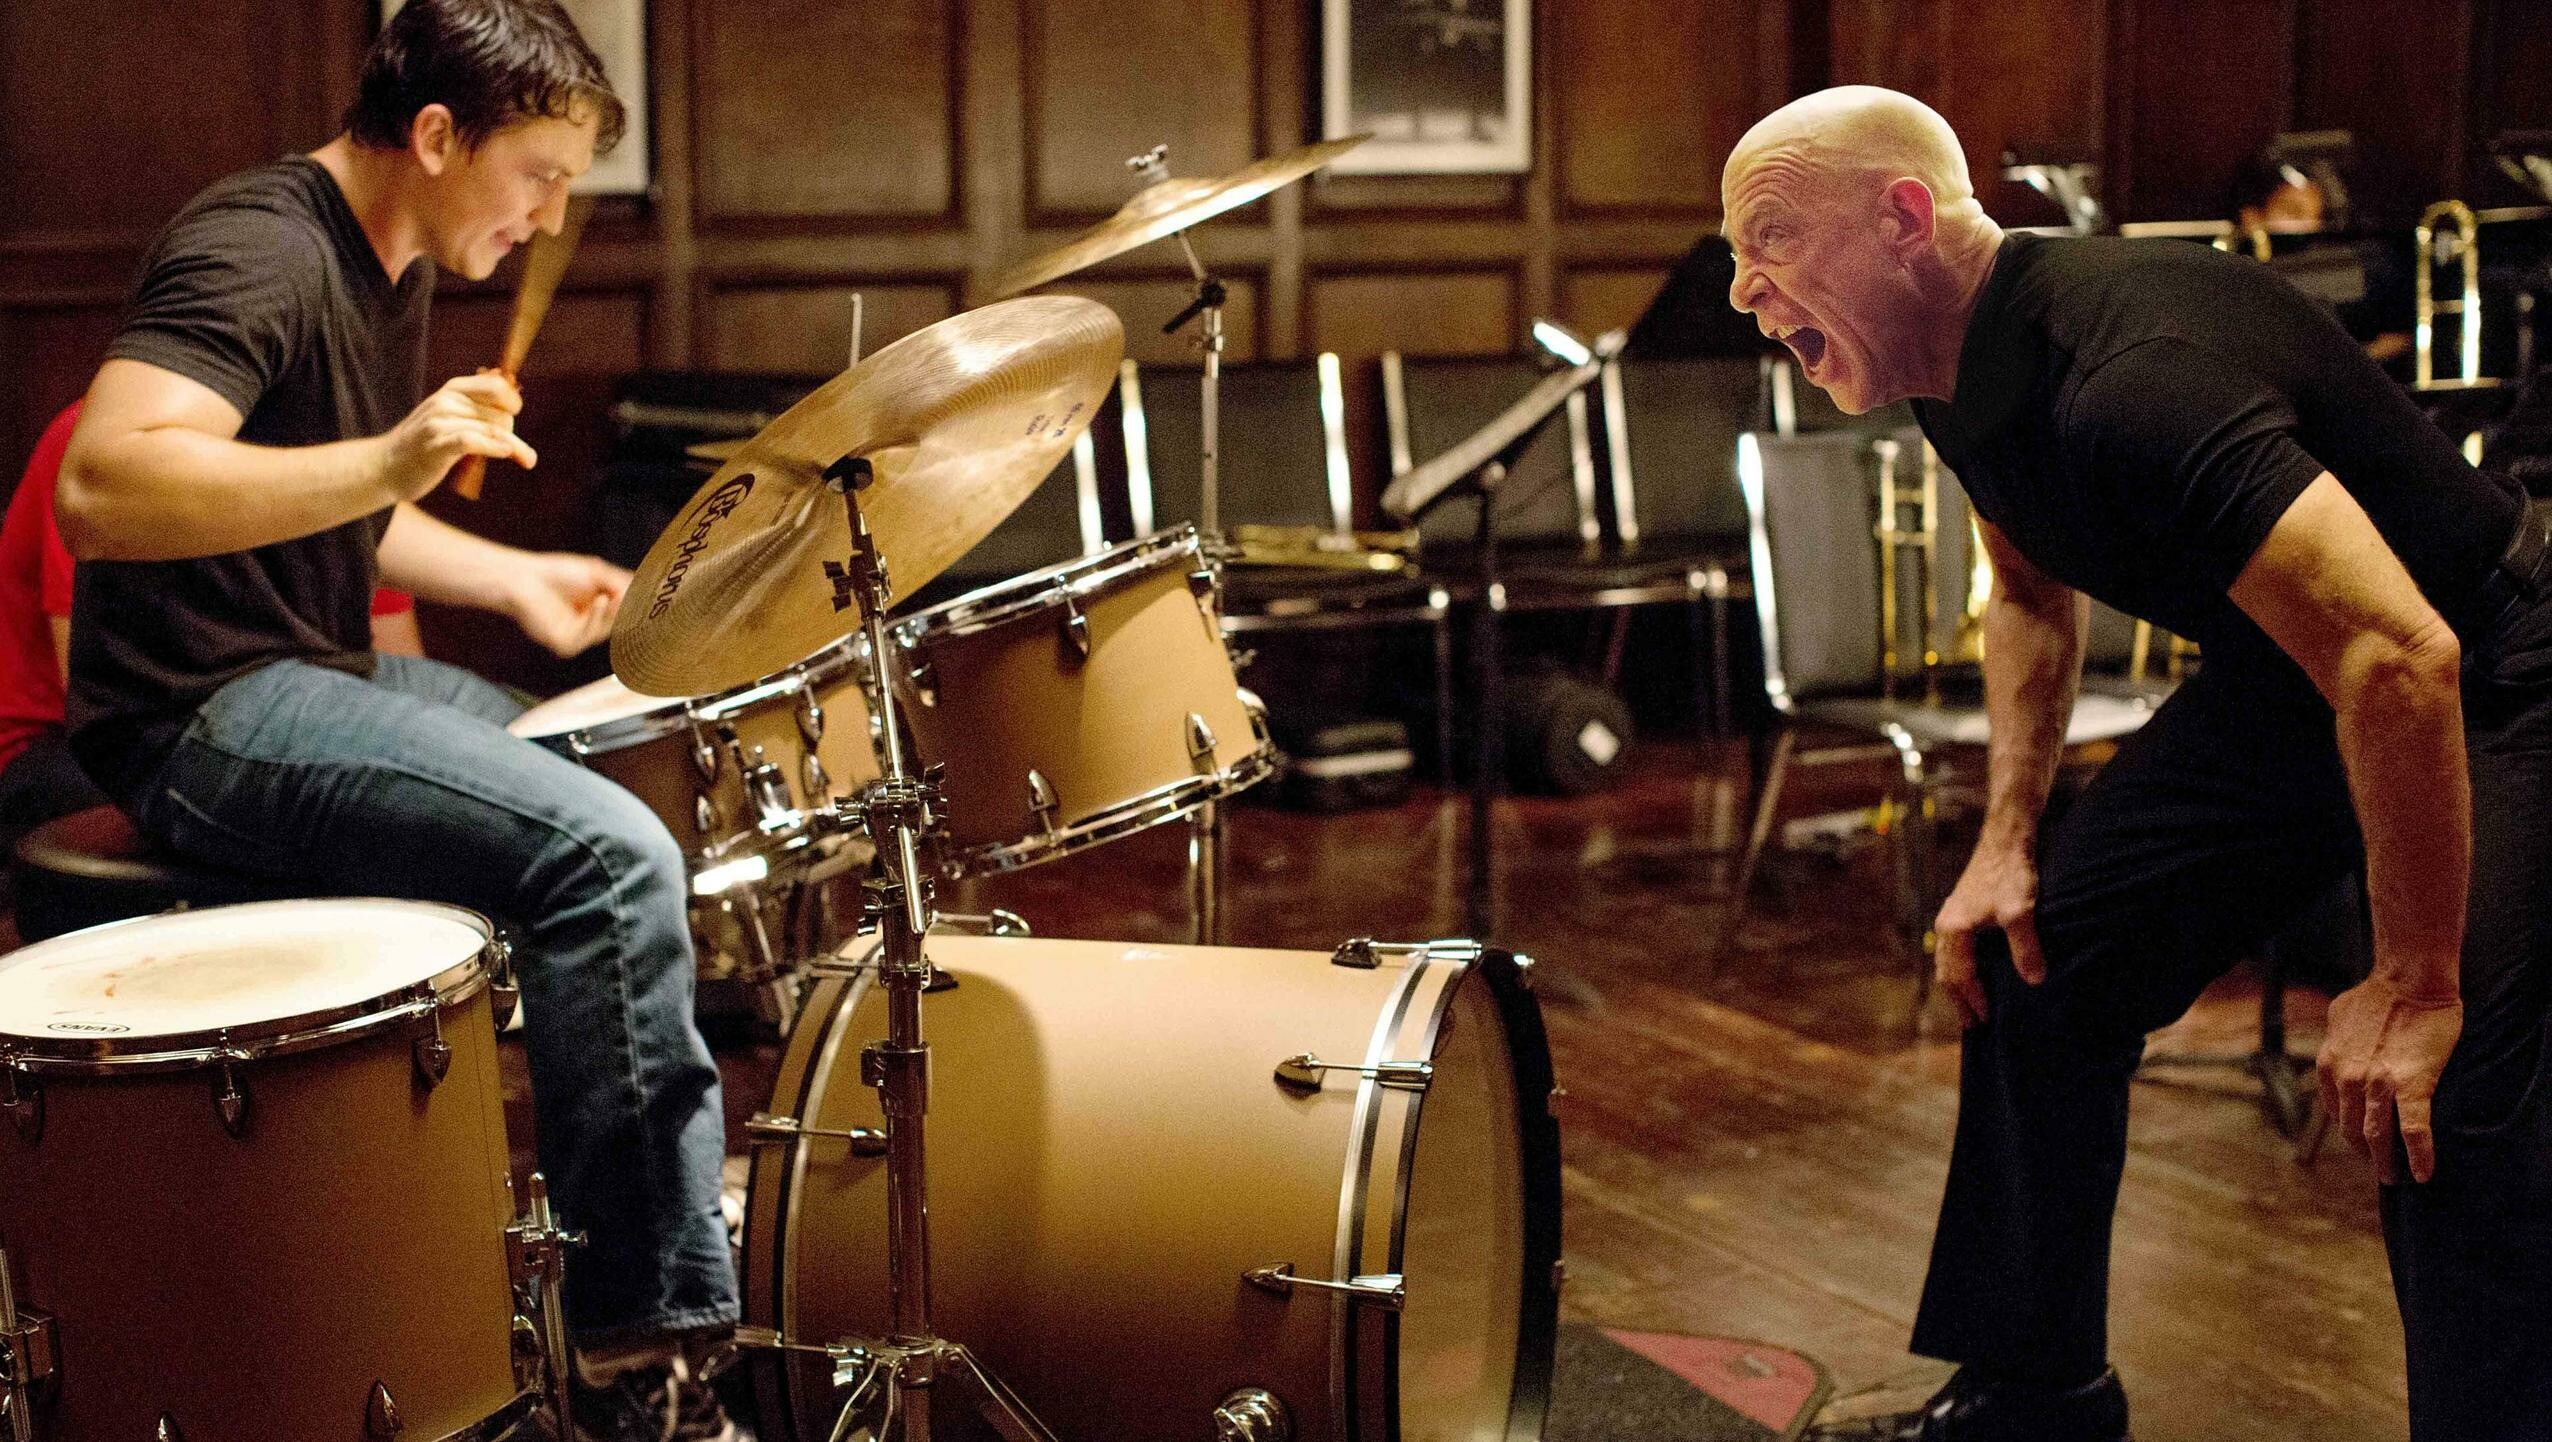 Whiplash: Jazz drummer Andrew Neiman, who is pushed to his limit by his abusive instructor Terence Fletcher. 2560x1450 HD Wallpaper.